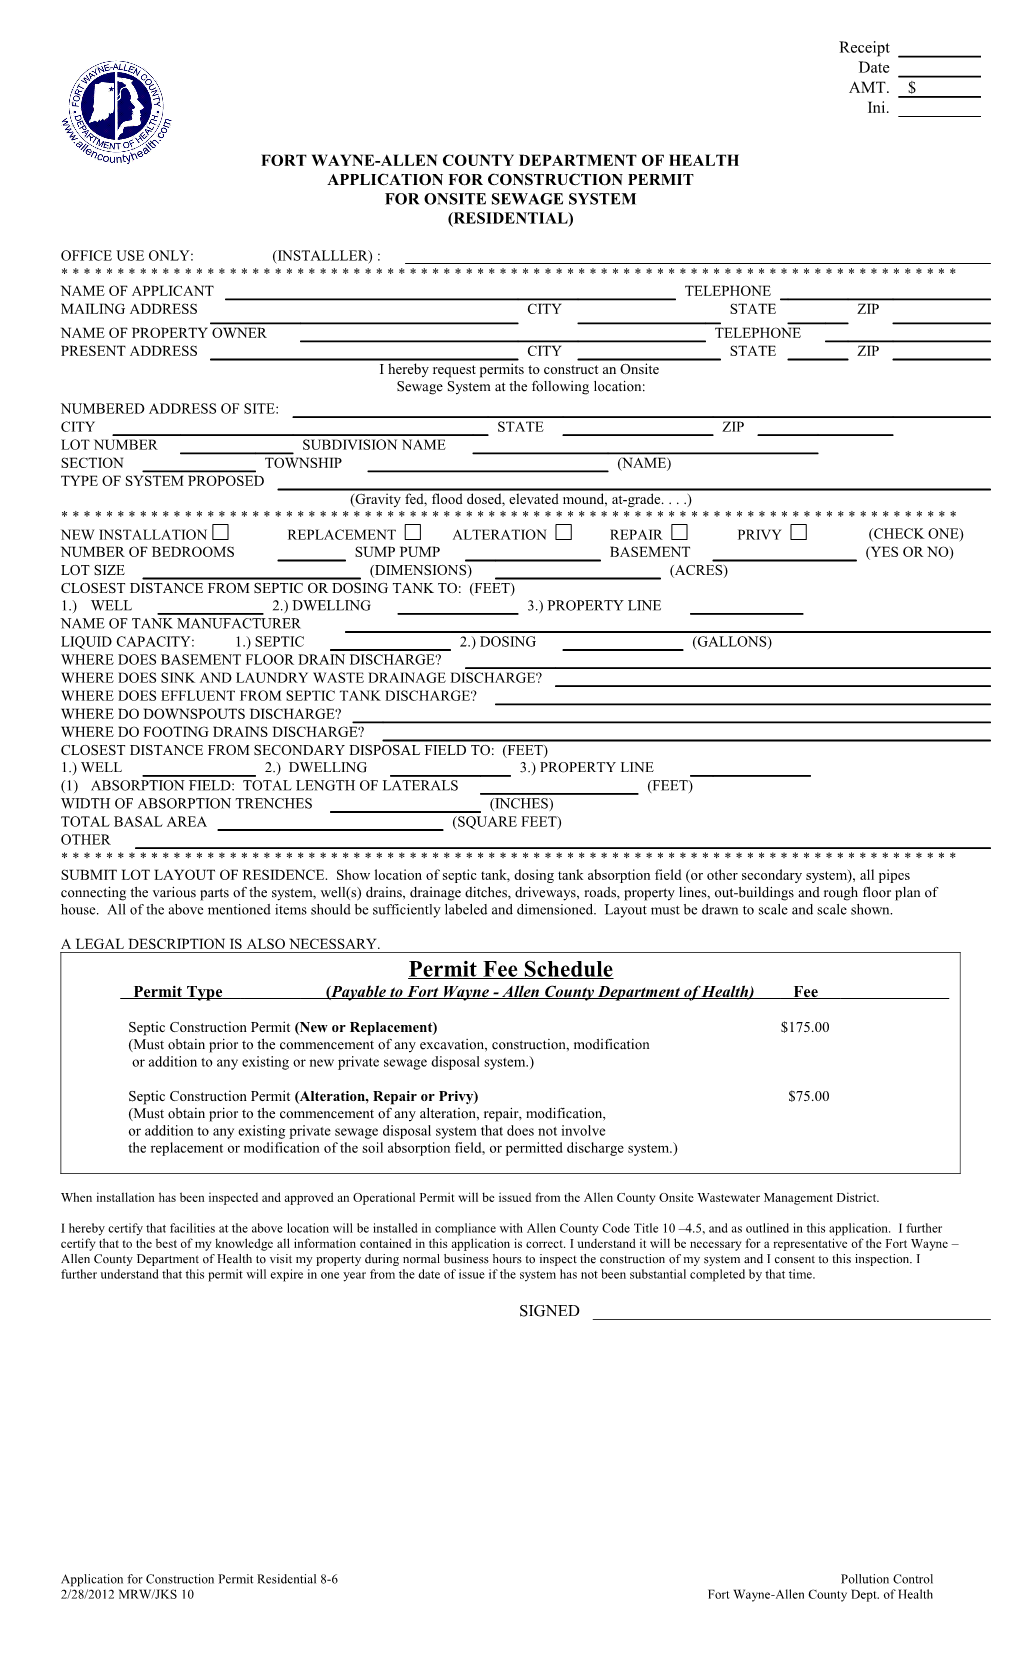 Application for Construction Permit